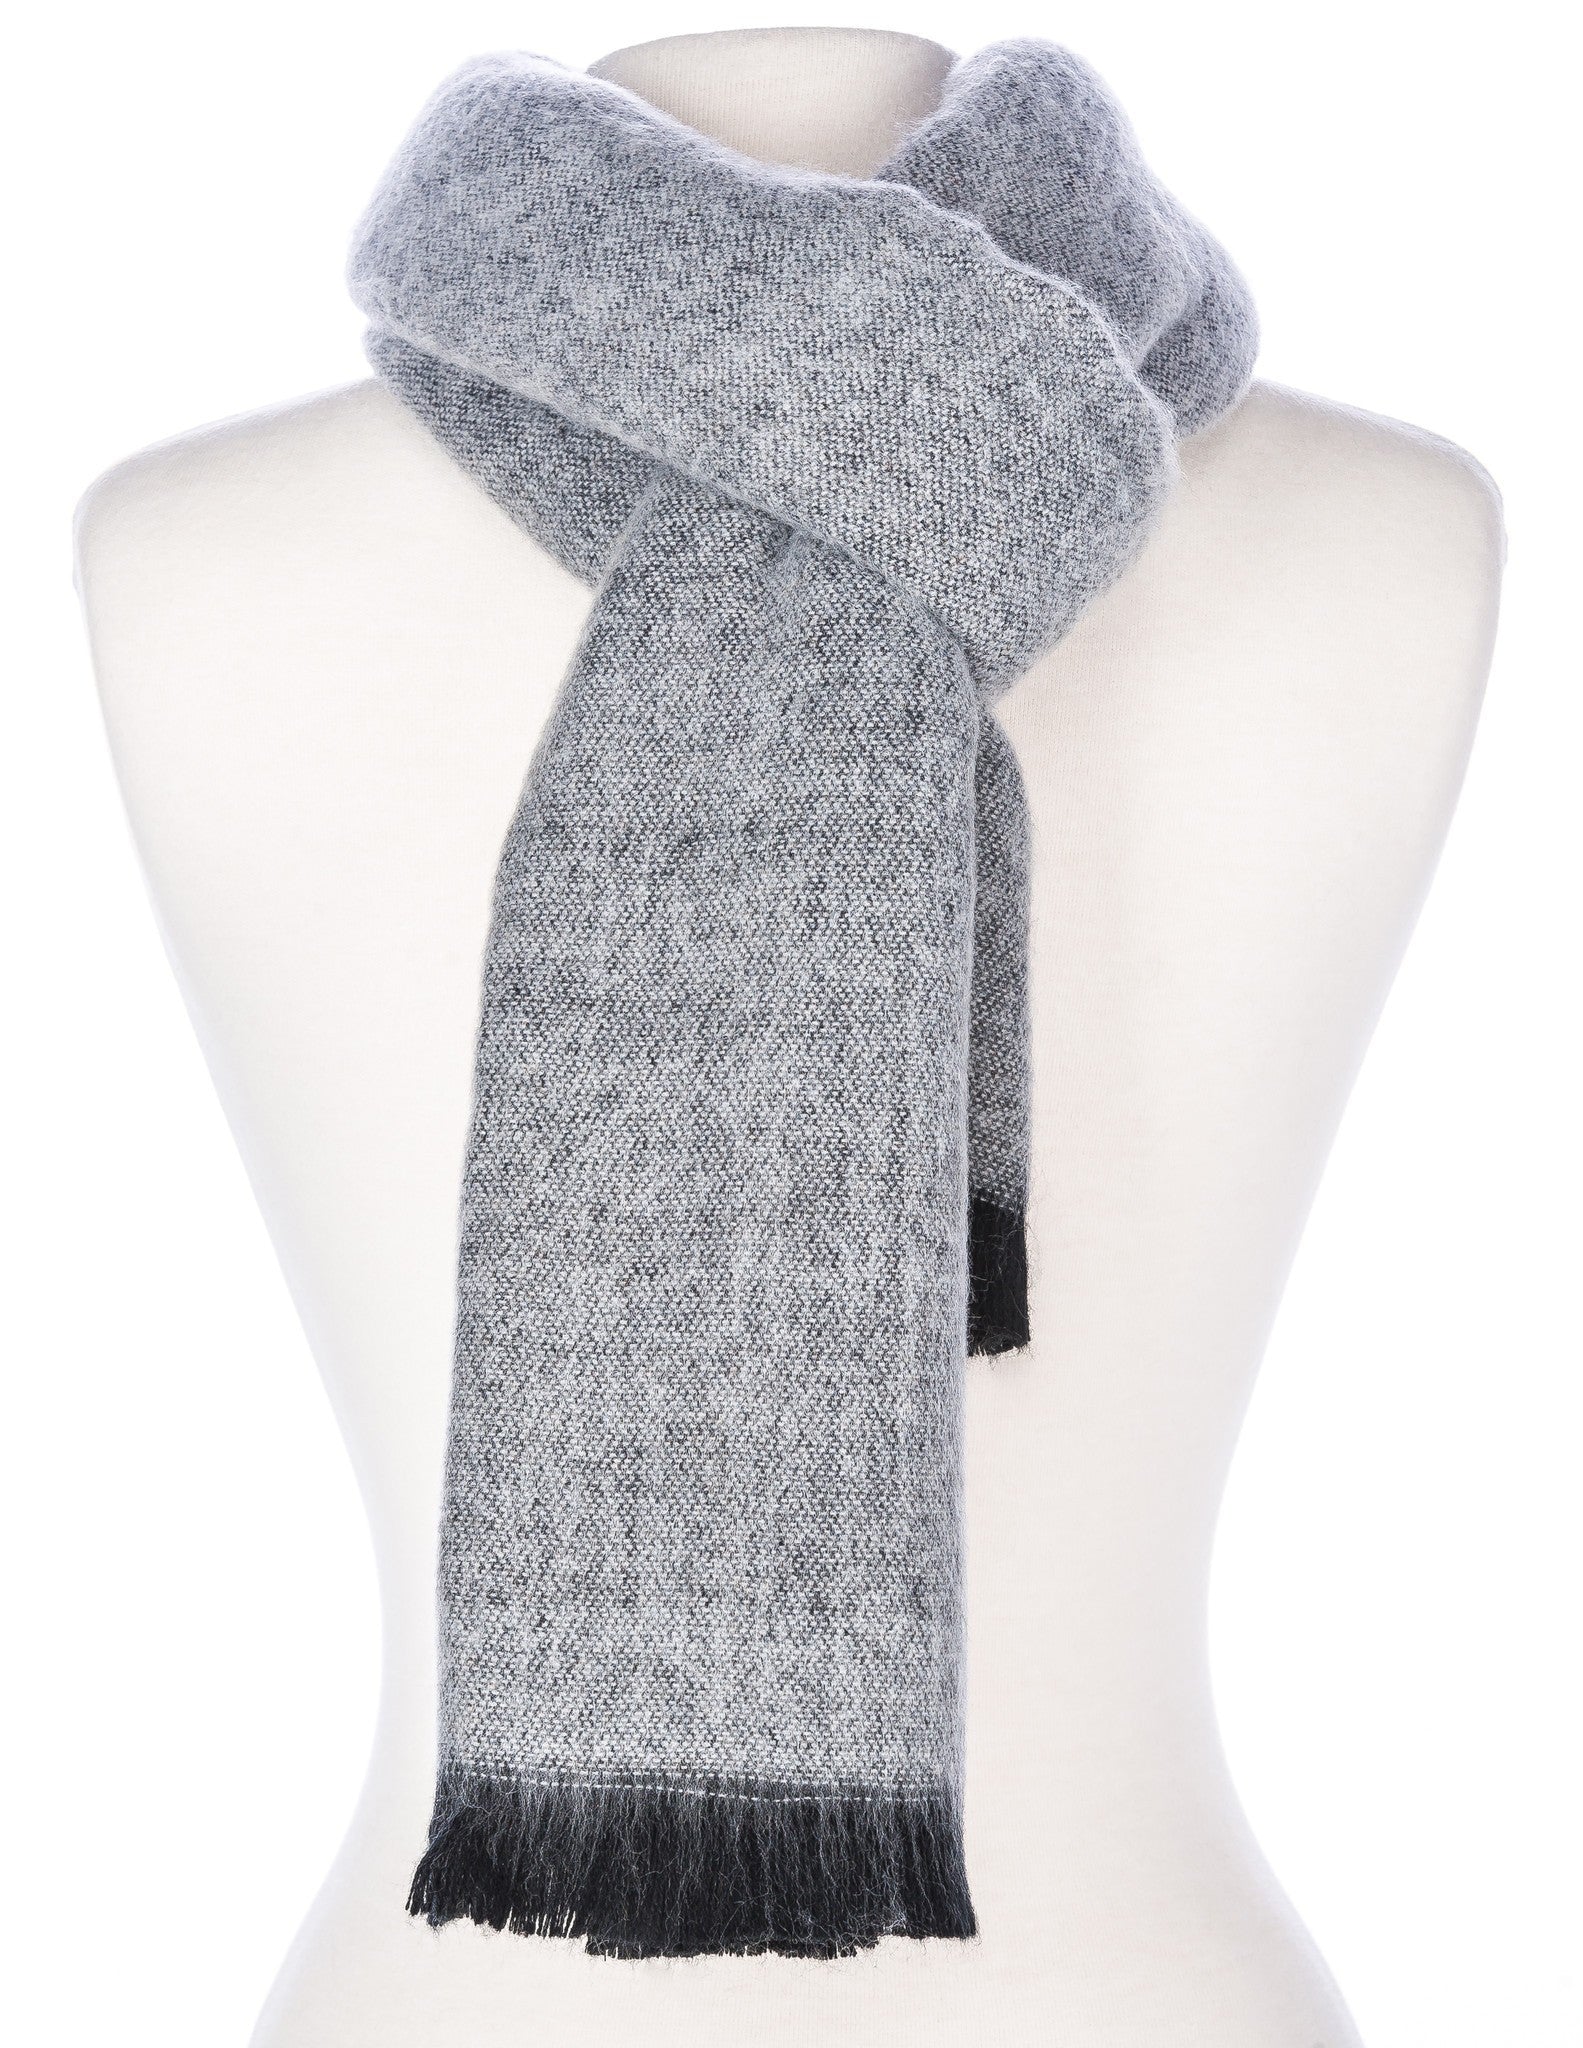 Men's Rochester Two-Tone Reversible Winter Scarf